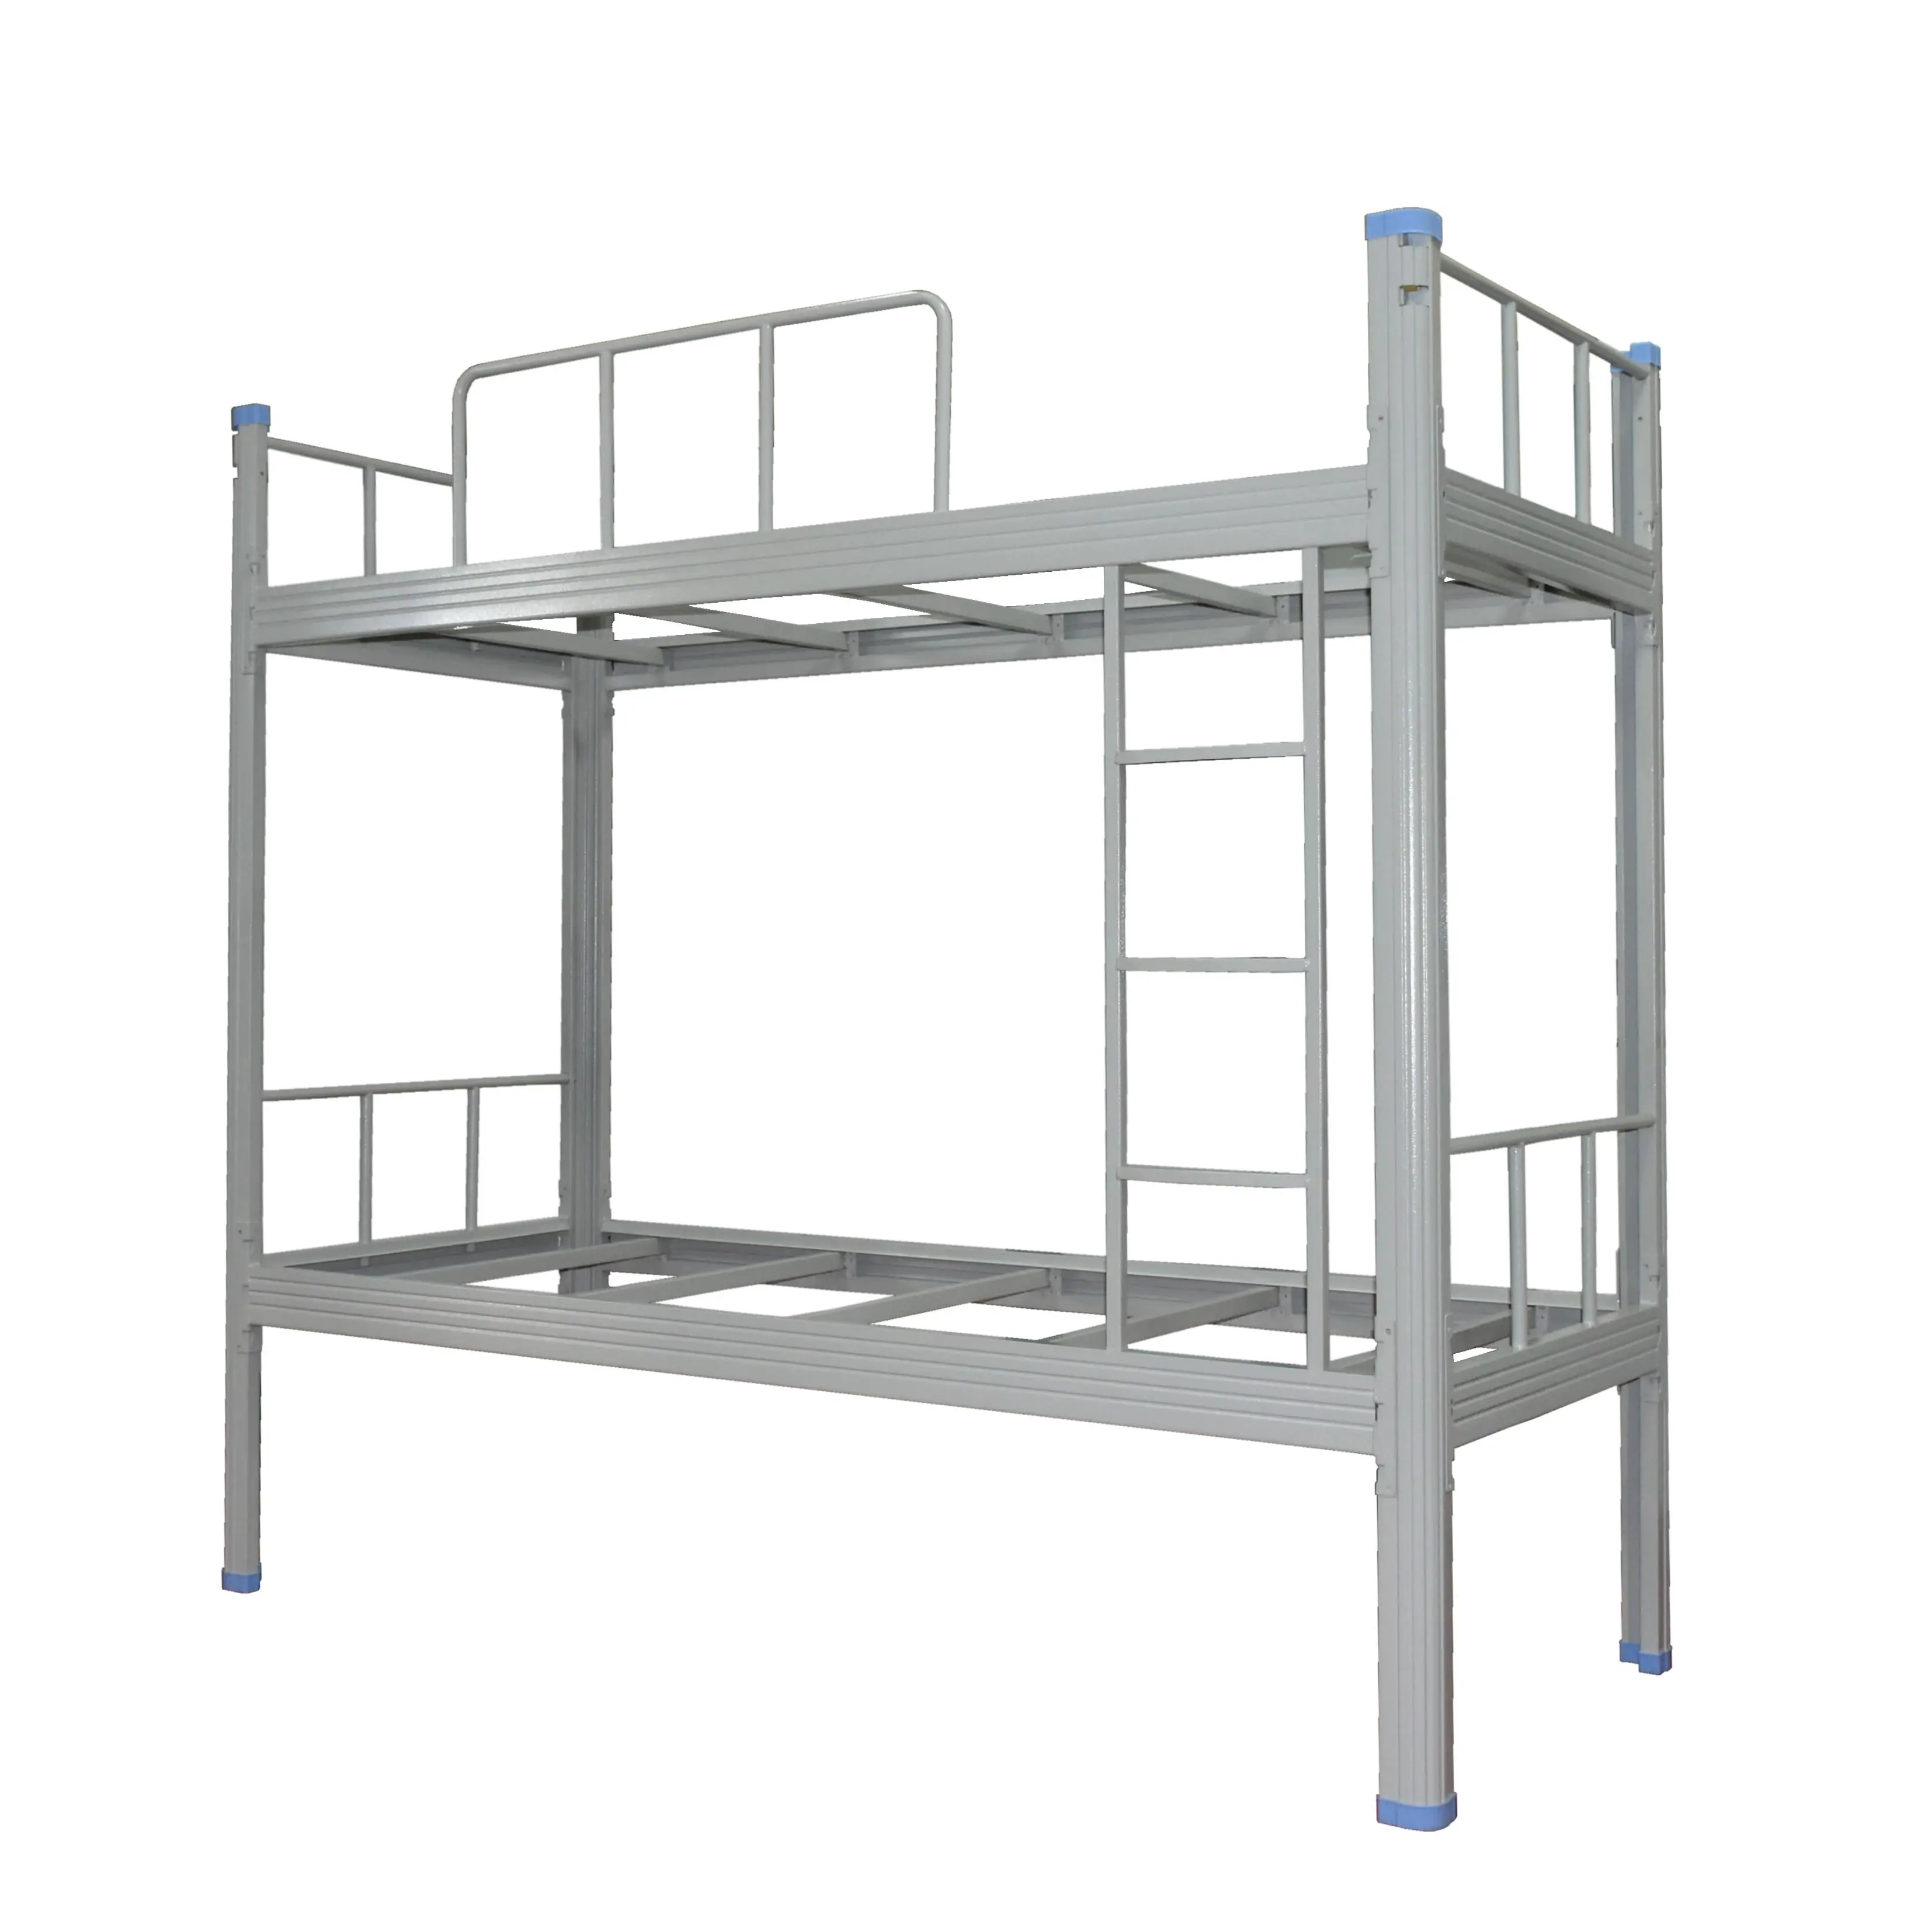 
steel bunk bed double matel bed for domirity school or home  (1600226852114)